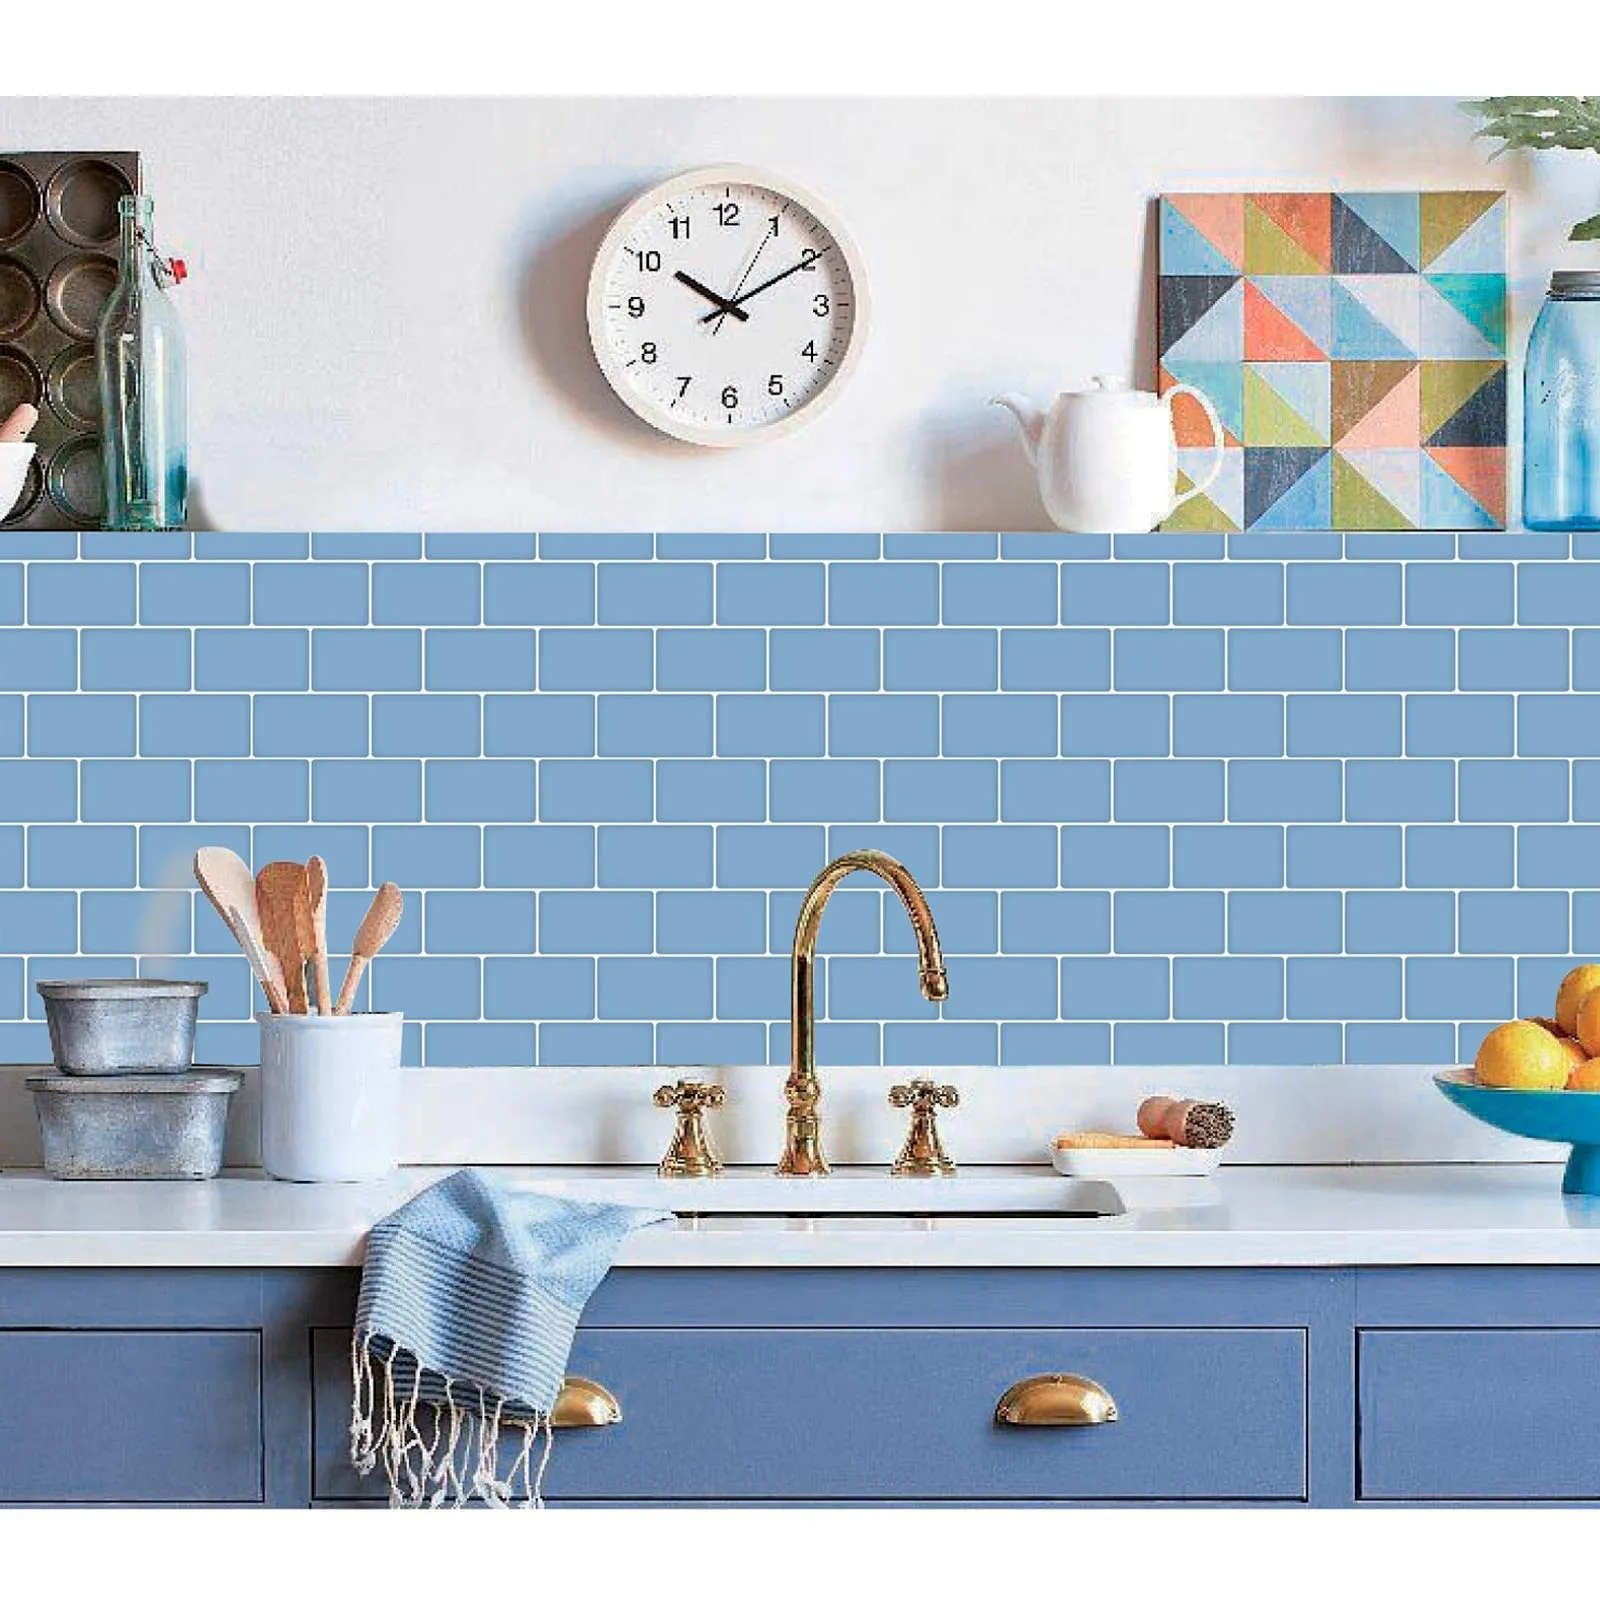 Art3d 30x30cm Peel and Stick Backsplash Tiles 3D Wall Stickers for Kitchen Bathroom Bedroom Laundry Rooms , Shiny Light Blue, Wallpapers(10-Sheets)